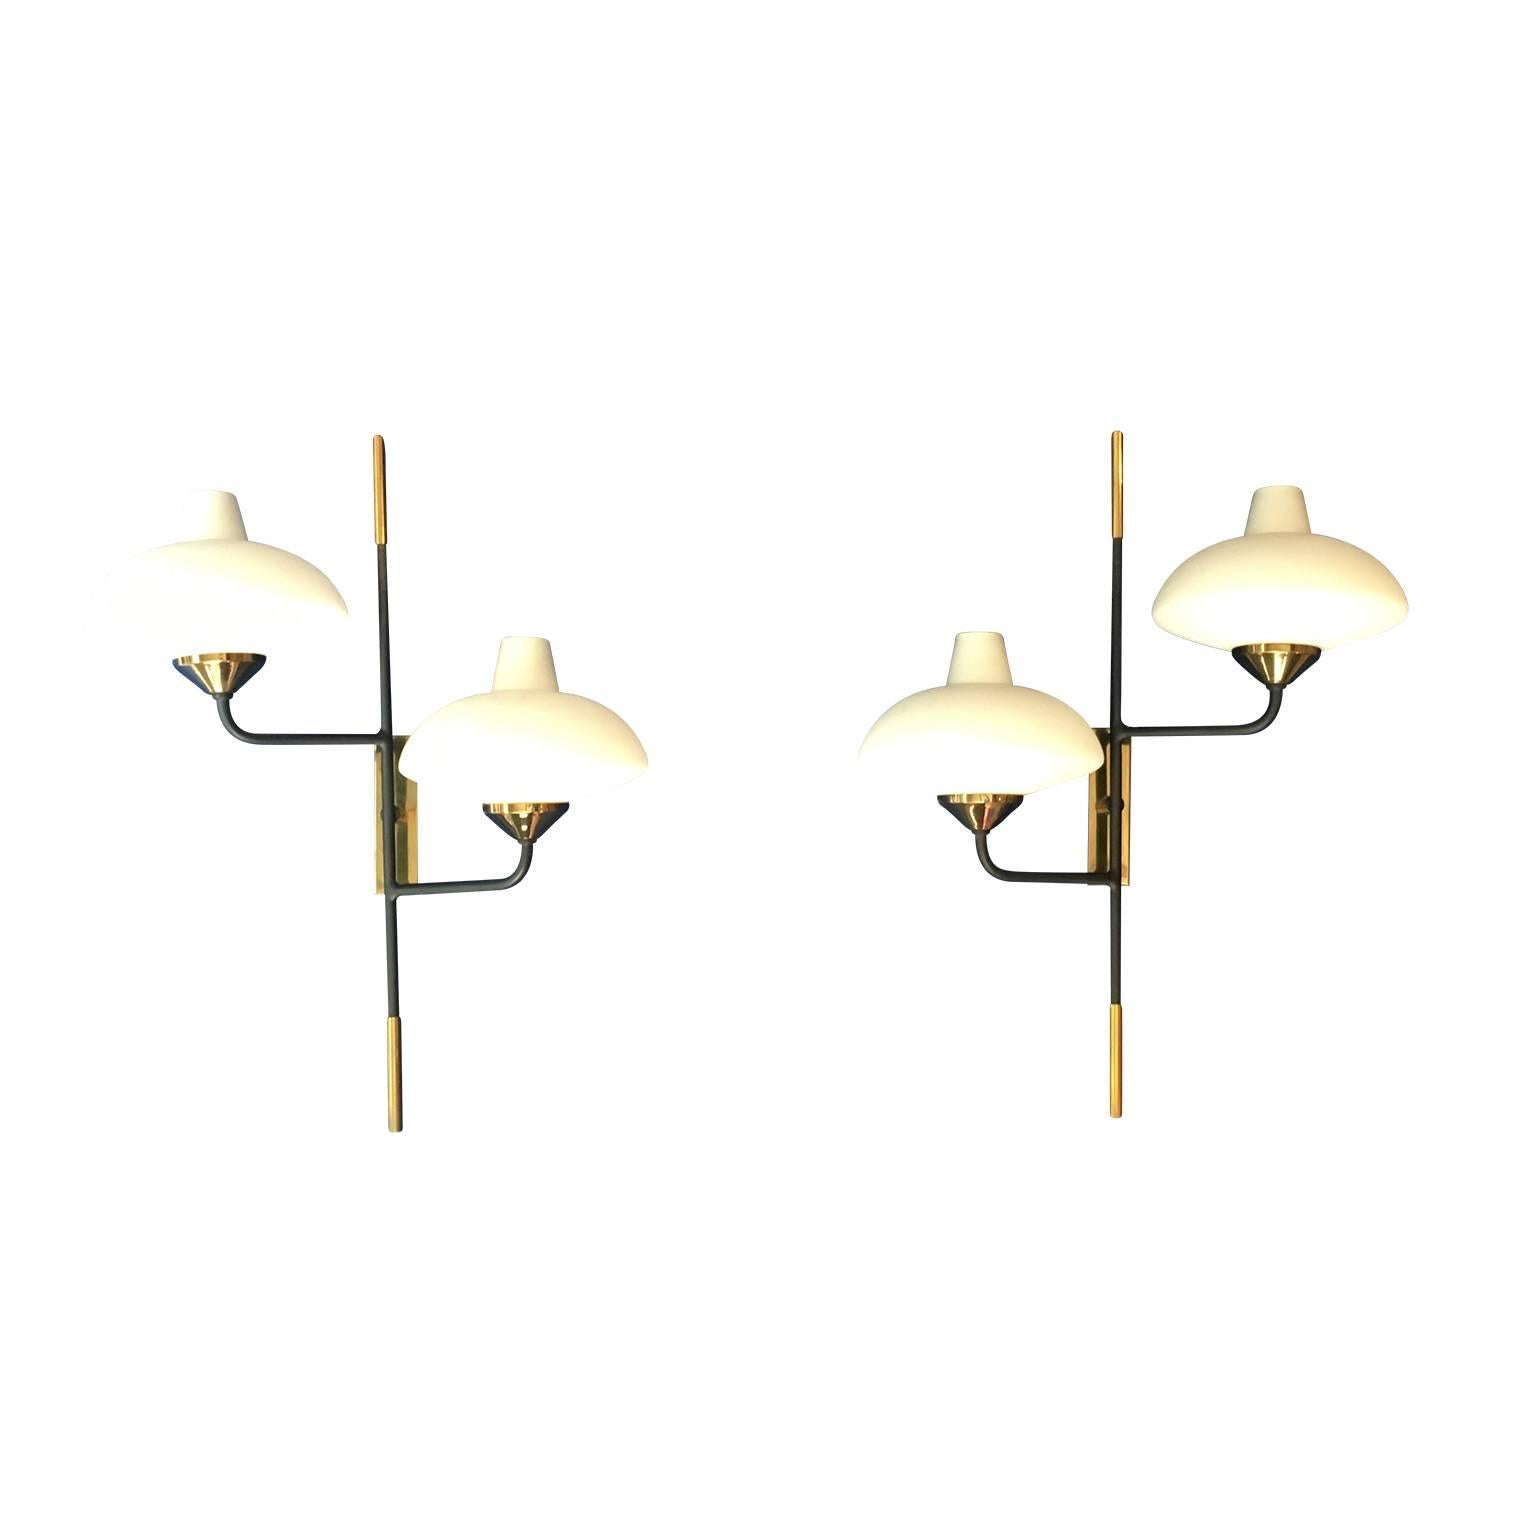 Maison Arlus 1950s Pair of Brass and Metal Sconces with Opaline Glass